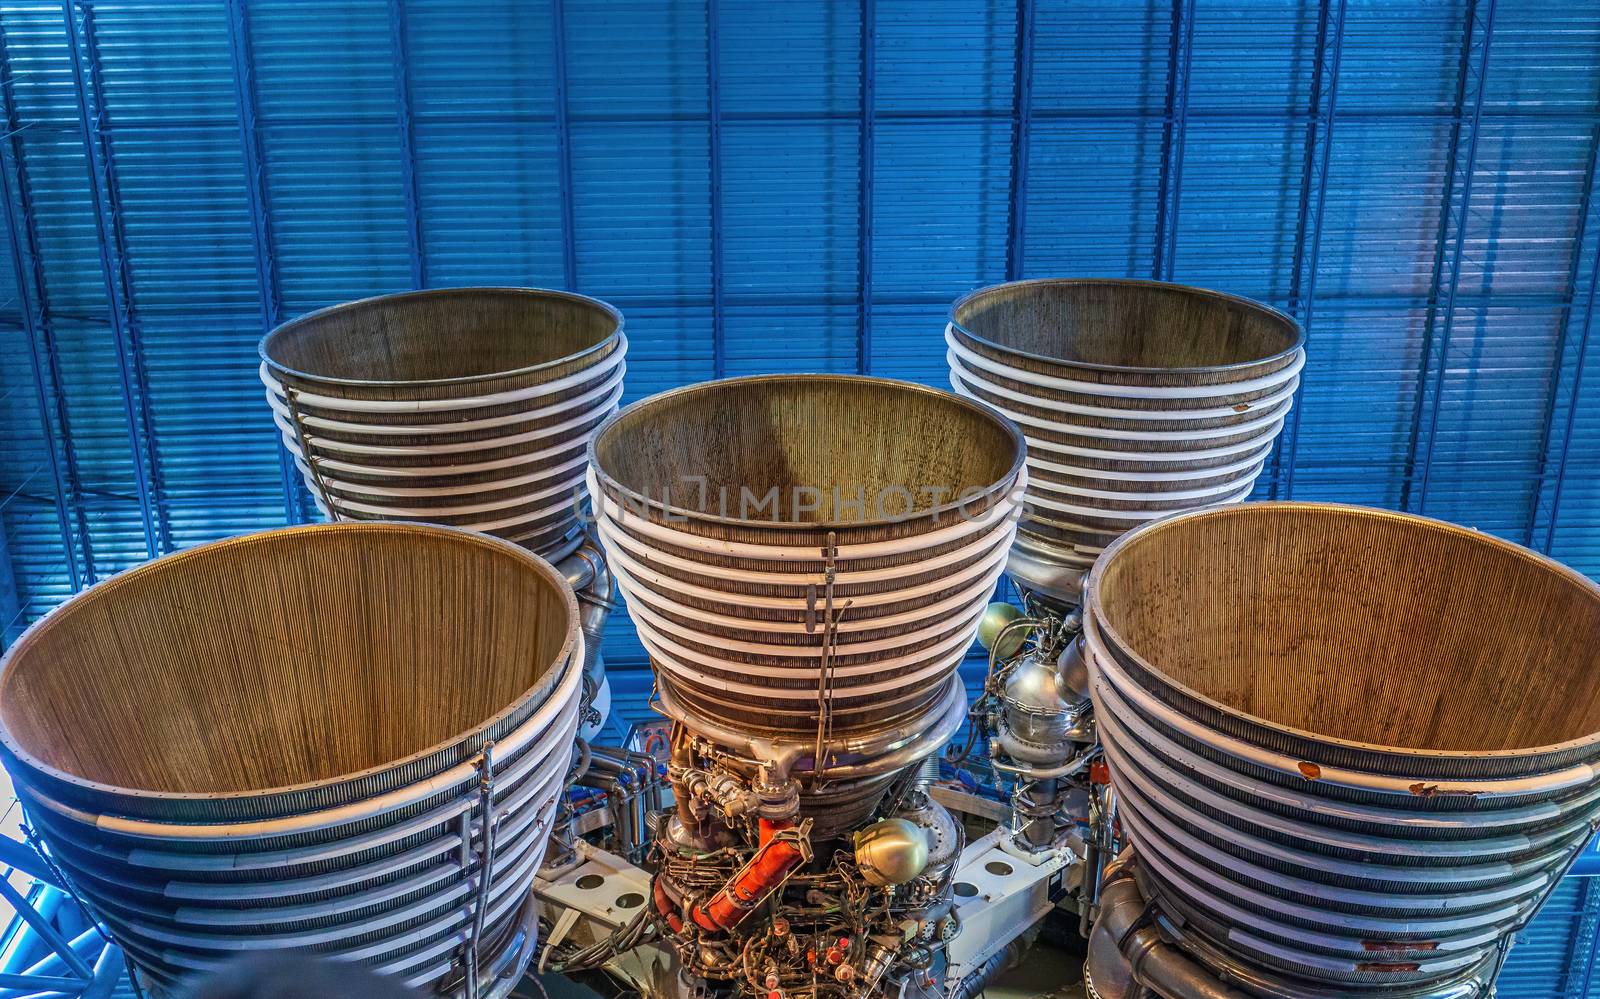 Saturn V rocket exhaust by COffe